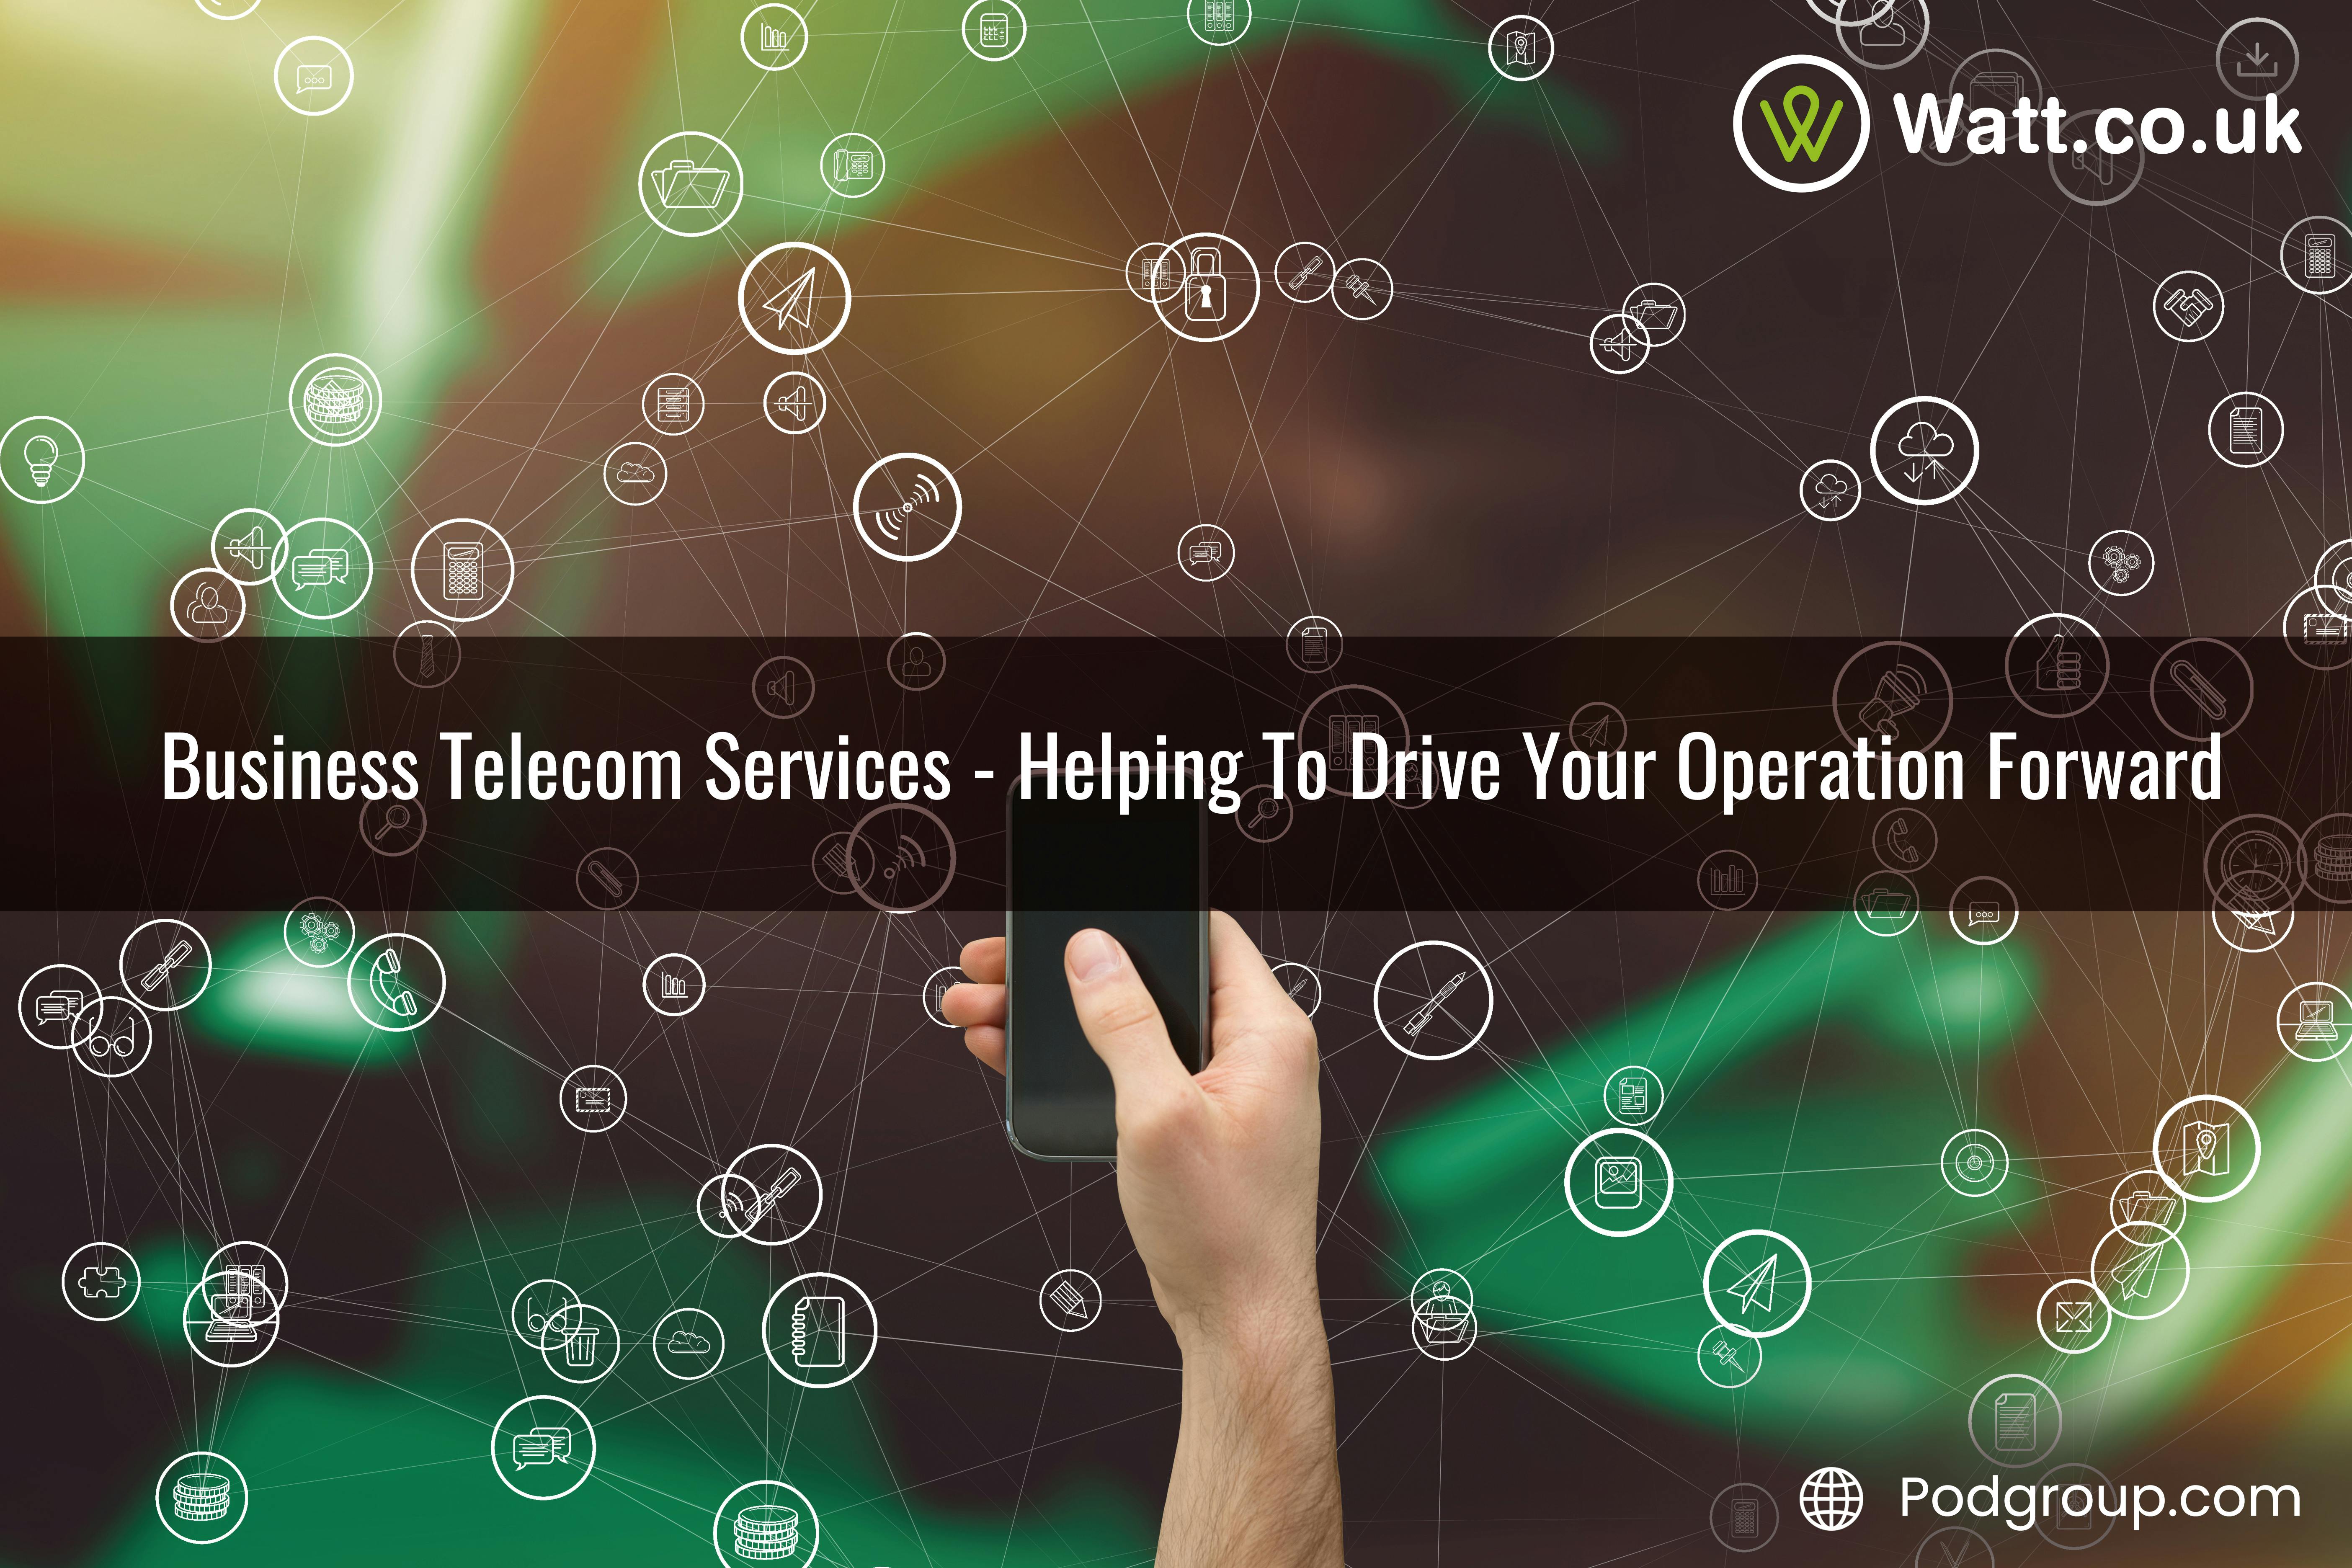 Business Telecom Services - Helping To Drive Your Operation Forward.jpg